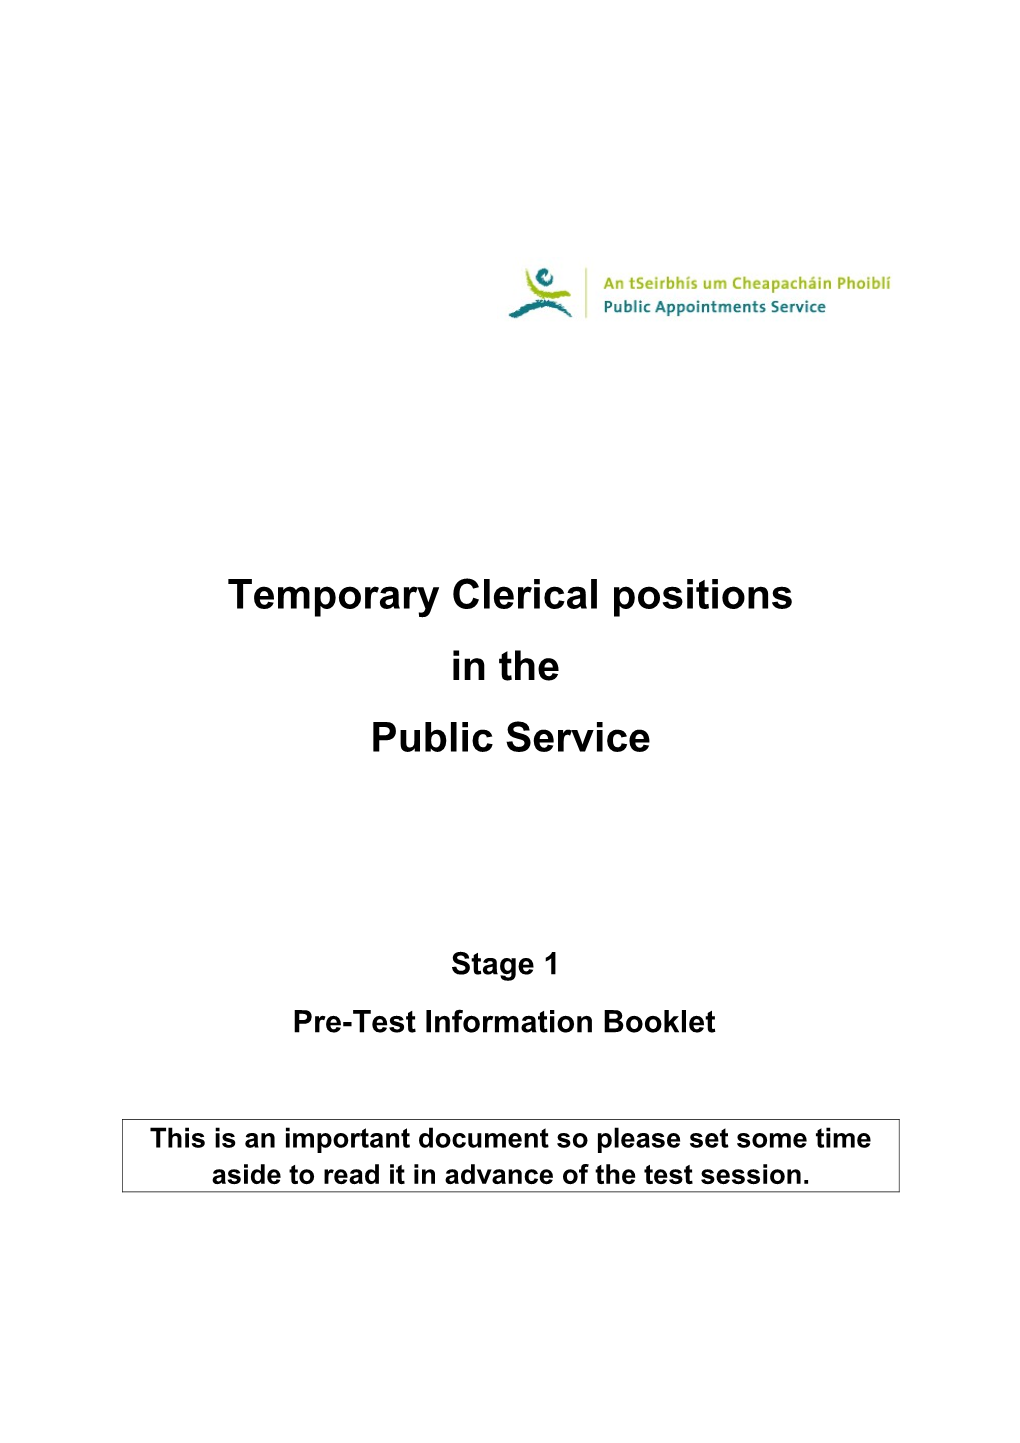 Temporary Clerical Positions